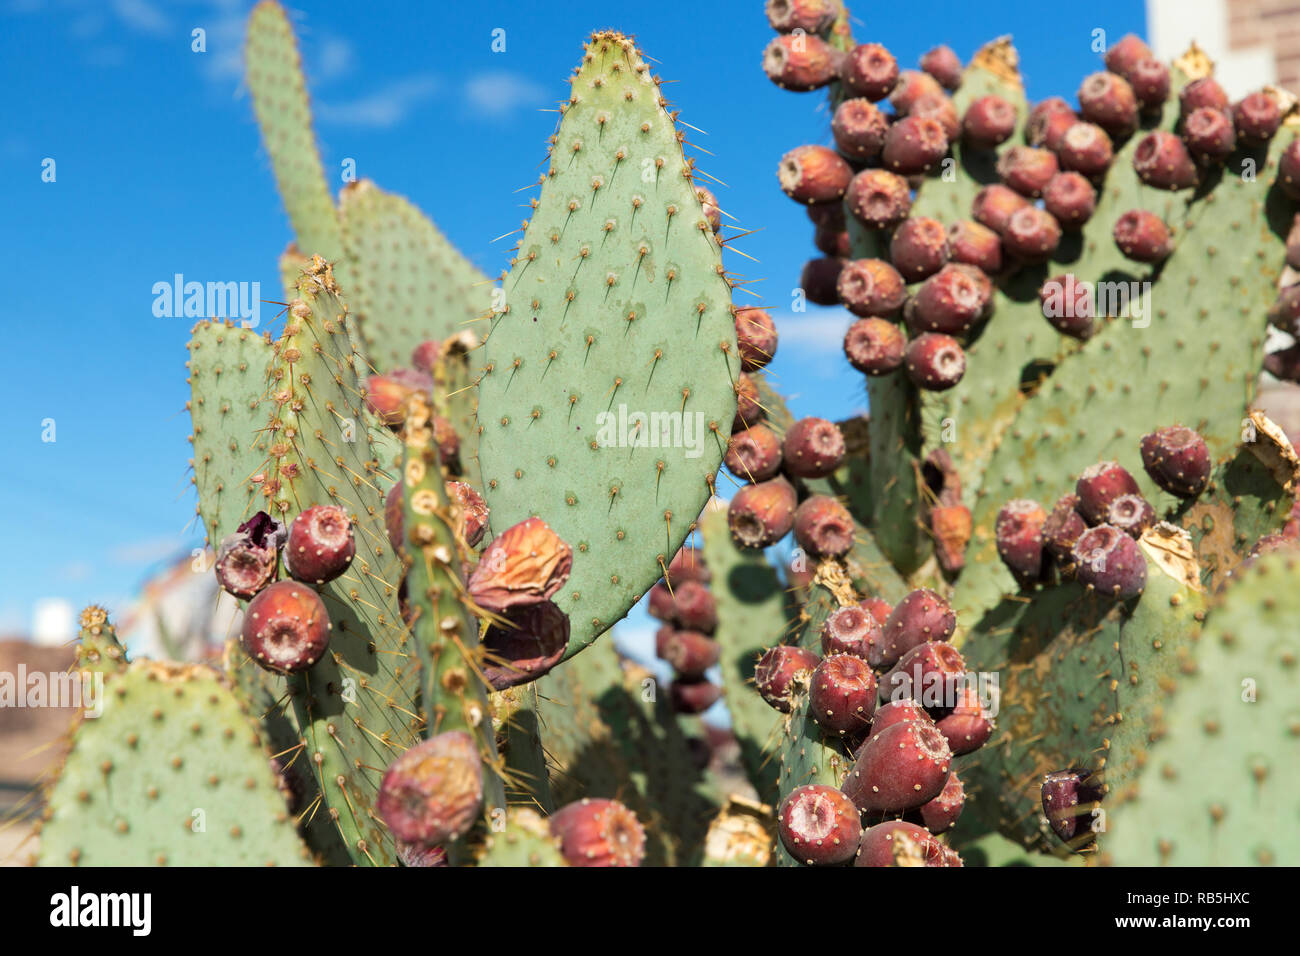 close up of cactus growing outdoors over blue sky Stock Photo